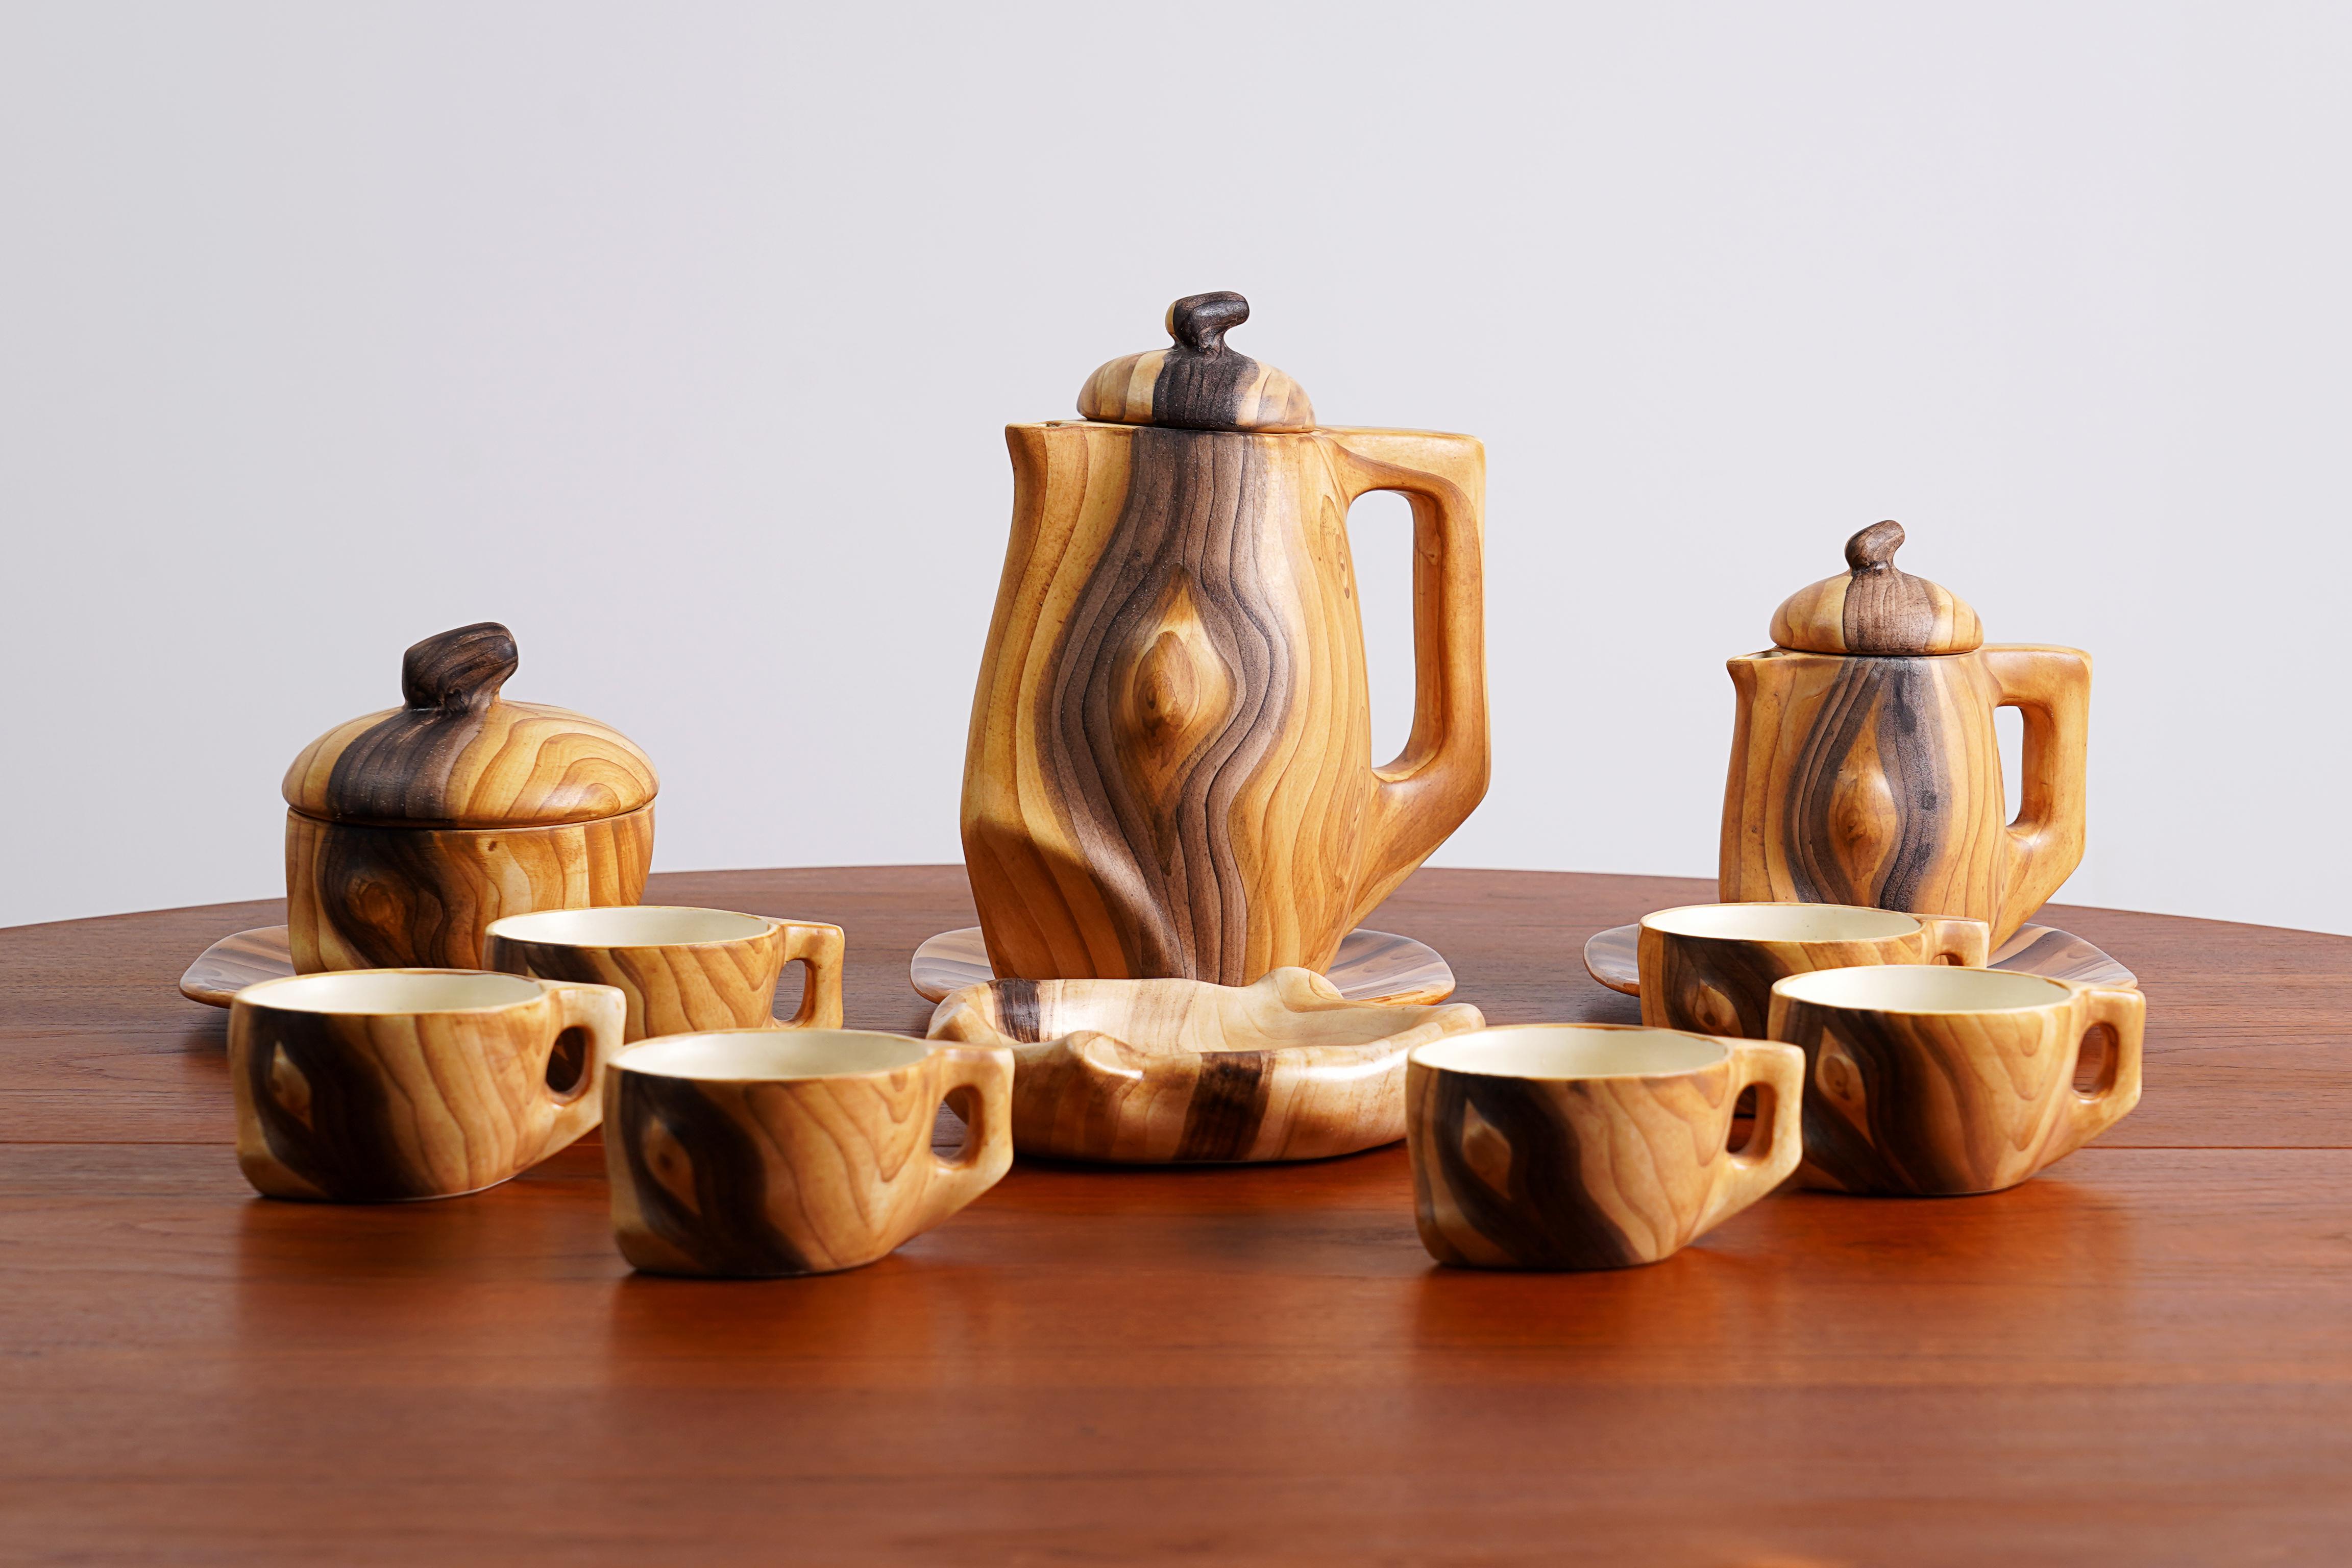 'Faux Bois' ceramic Tea sets of 13 pieces by Grandjean Jourdan, Vallauris France 1950s / 1960s.

Some of the pieces are marked Vallauris underneath.

The set is composed of 6 cups / 2 jars / 1 dish / 1 sugar bowl / 3 plates

Atelier Grandjean